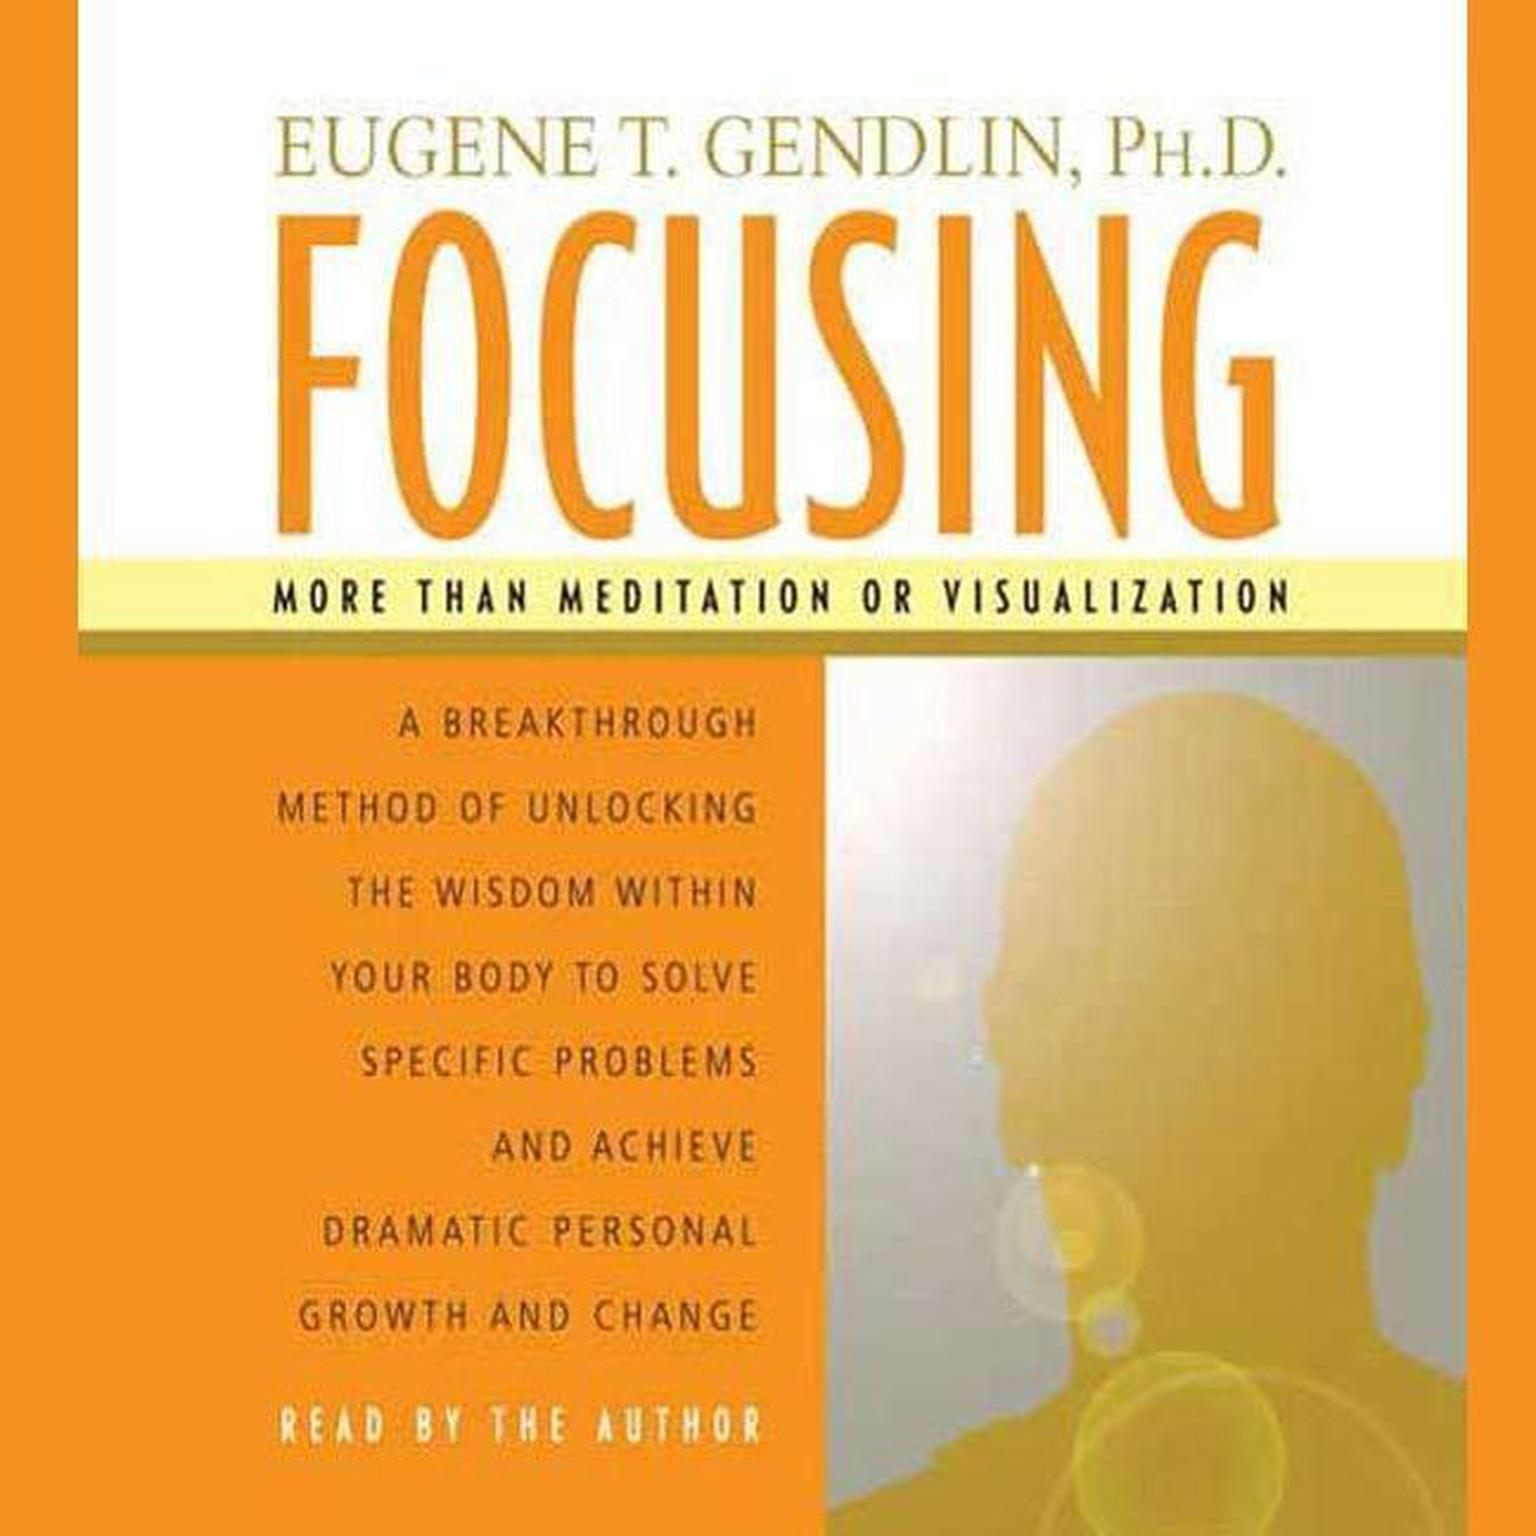 Focusing (Abridged): A Breakthrough Method of Unlocking the Wisdom Within Your Body to Solve Specific Problems and Achieve Dramatic Personal Growth and Change Audiobook, by Eugene T. Gendlin